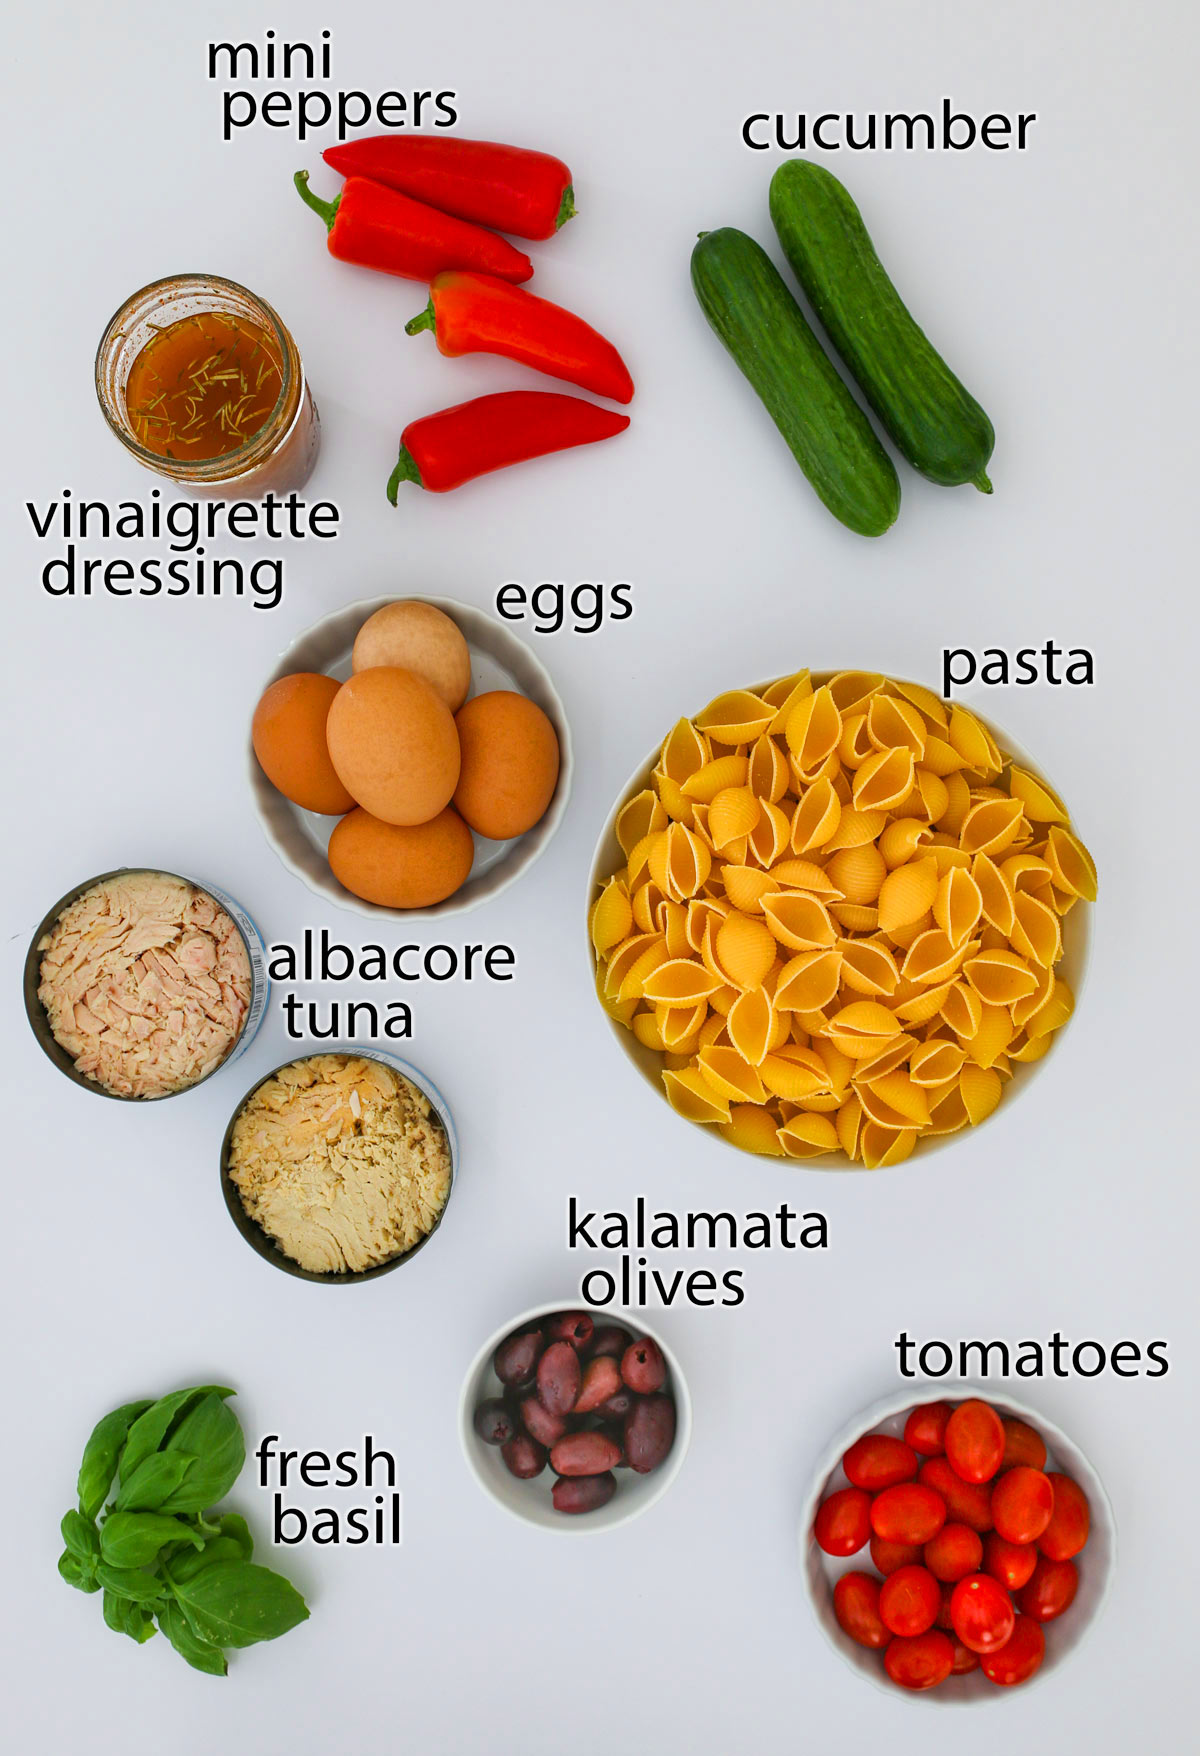 ingredients included in tuna pasta salad.